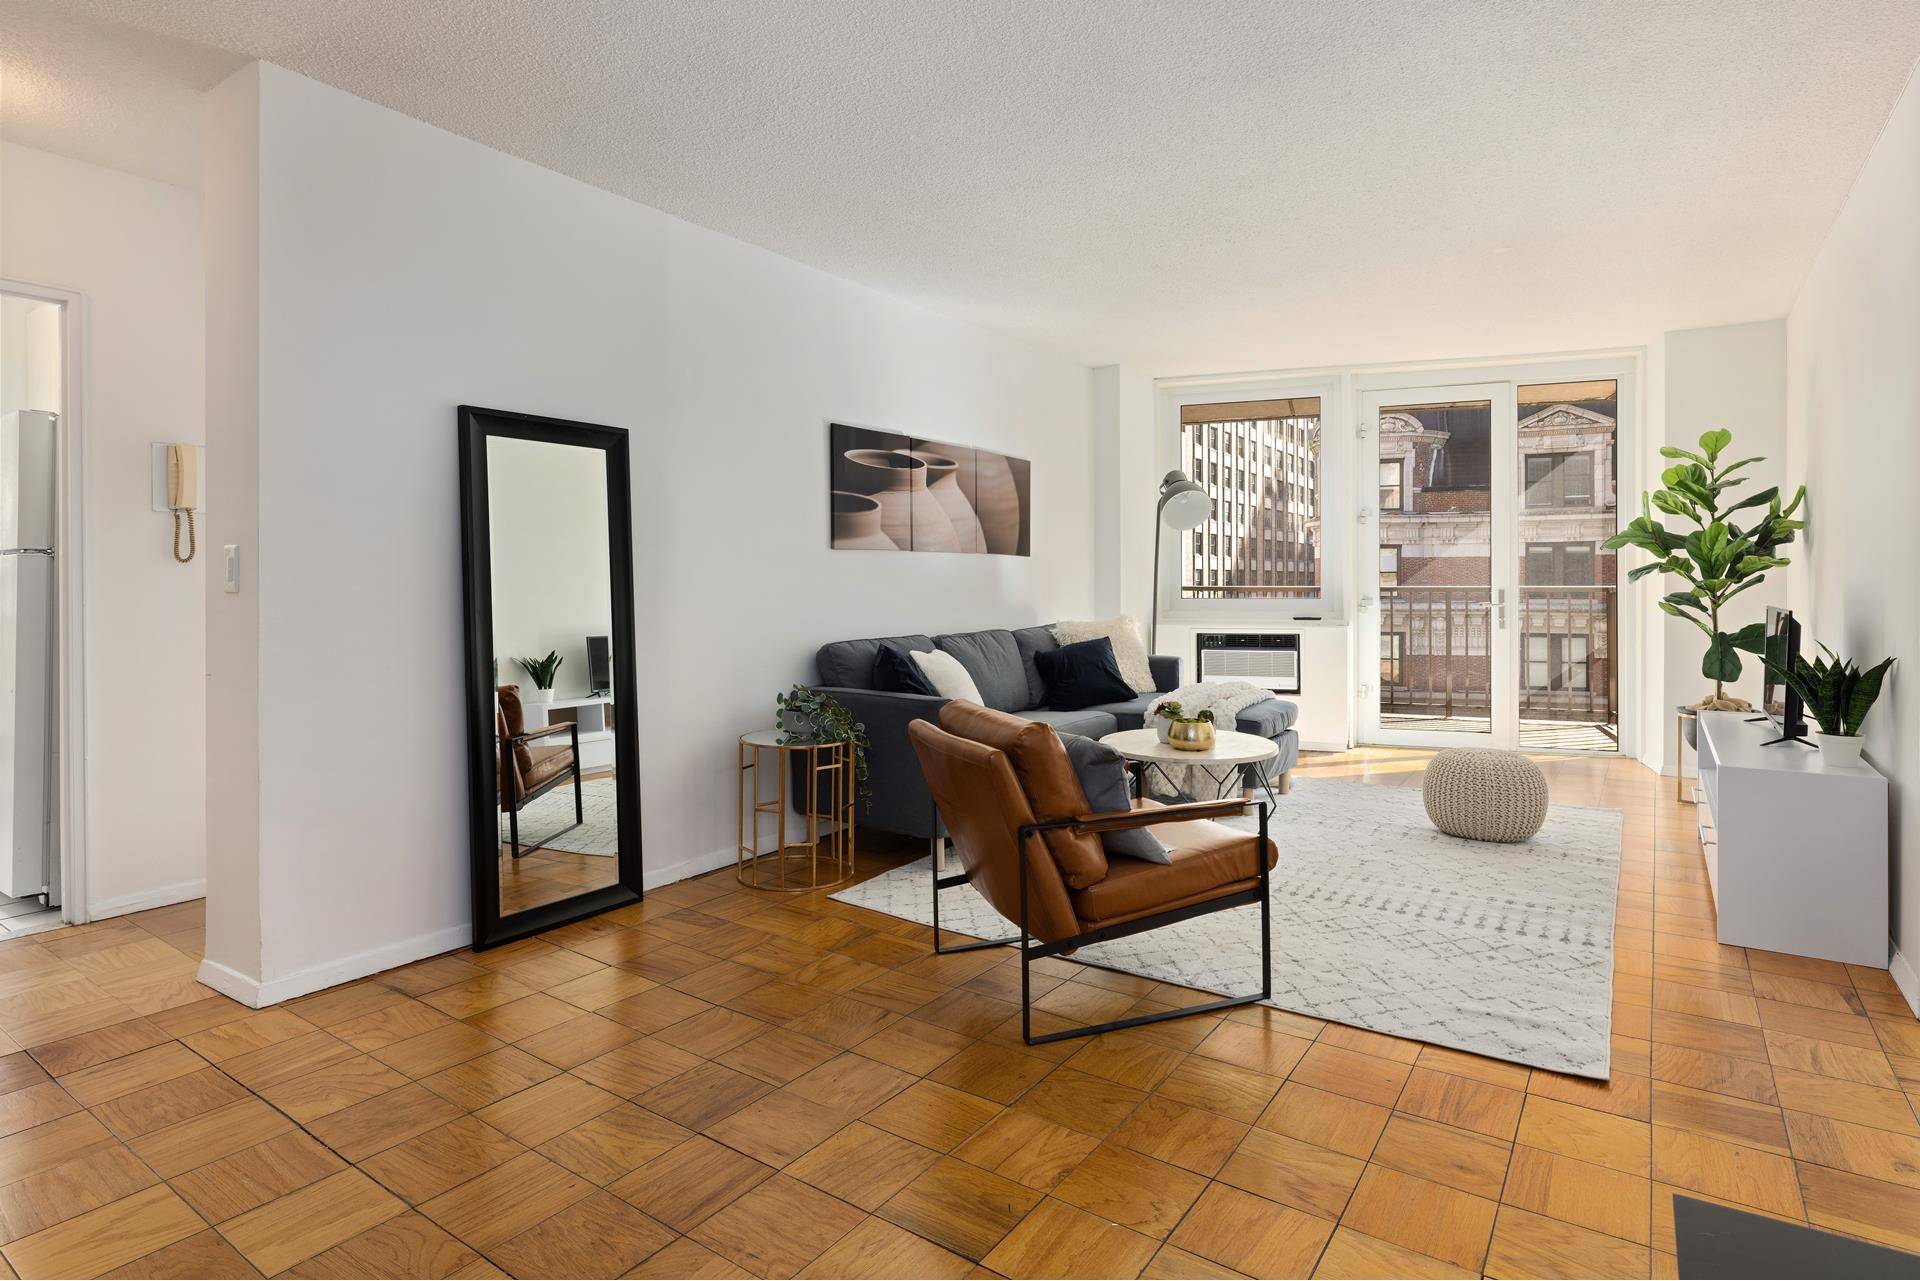 Very spacious three bedroom two bathroom with PRIVATE BALCONY located in La Premiere ; afull service luxury building in Midtown West.